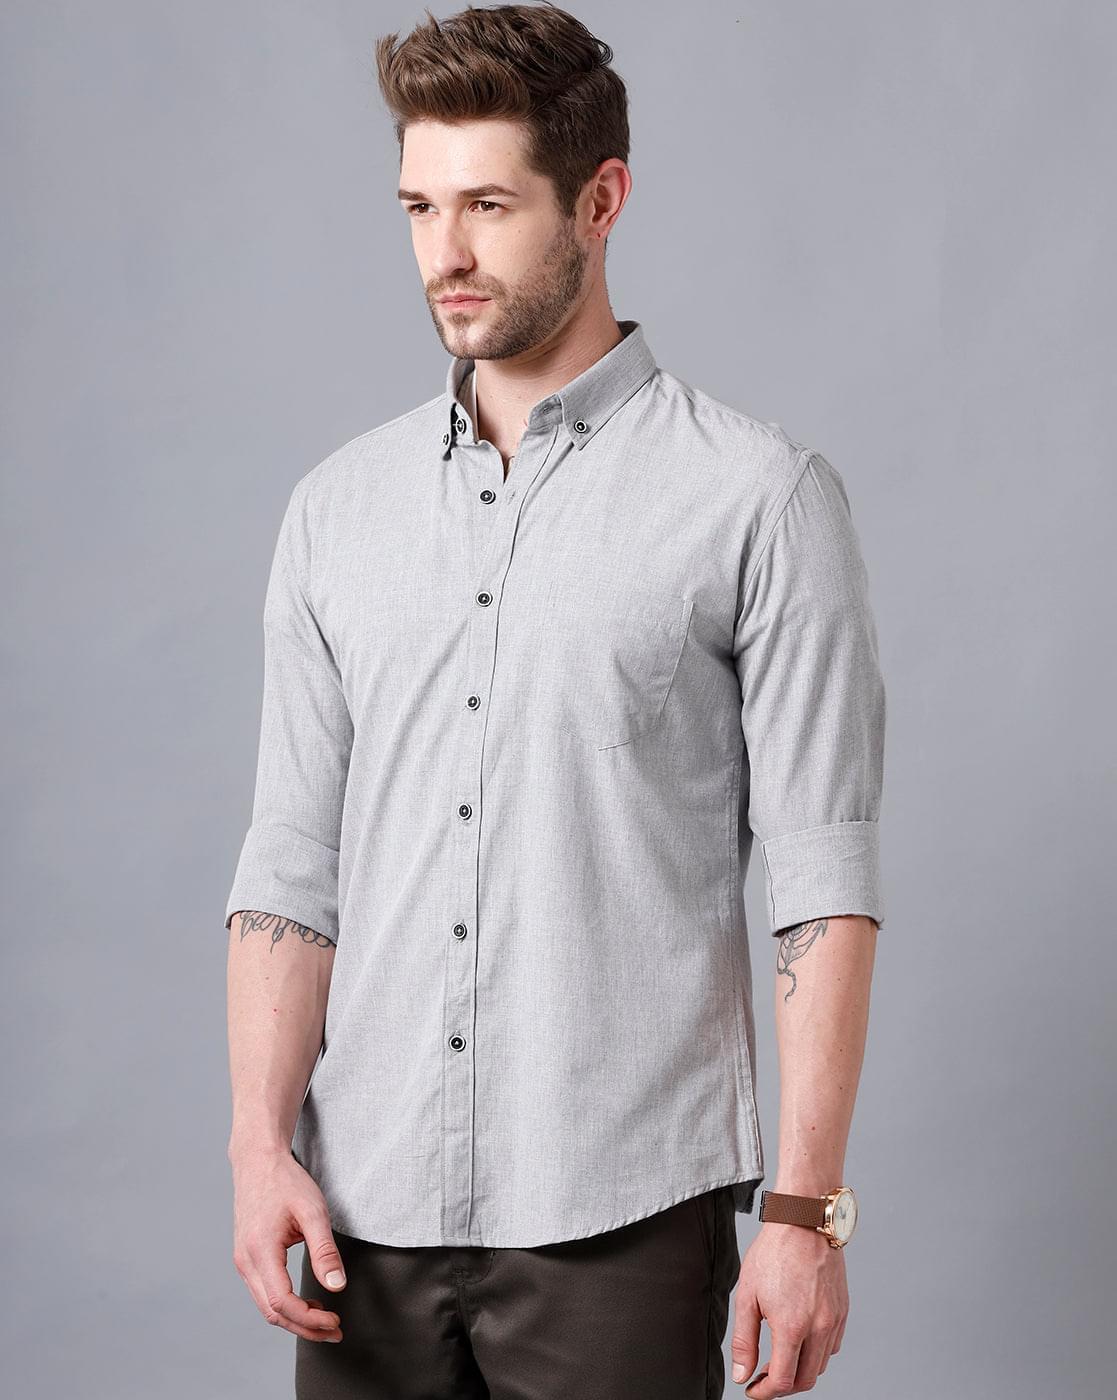 solid casual shirts